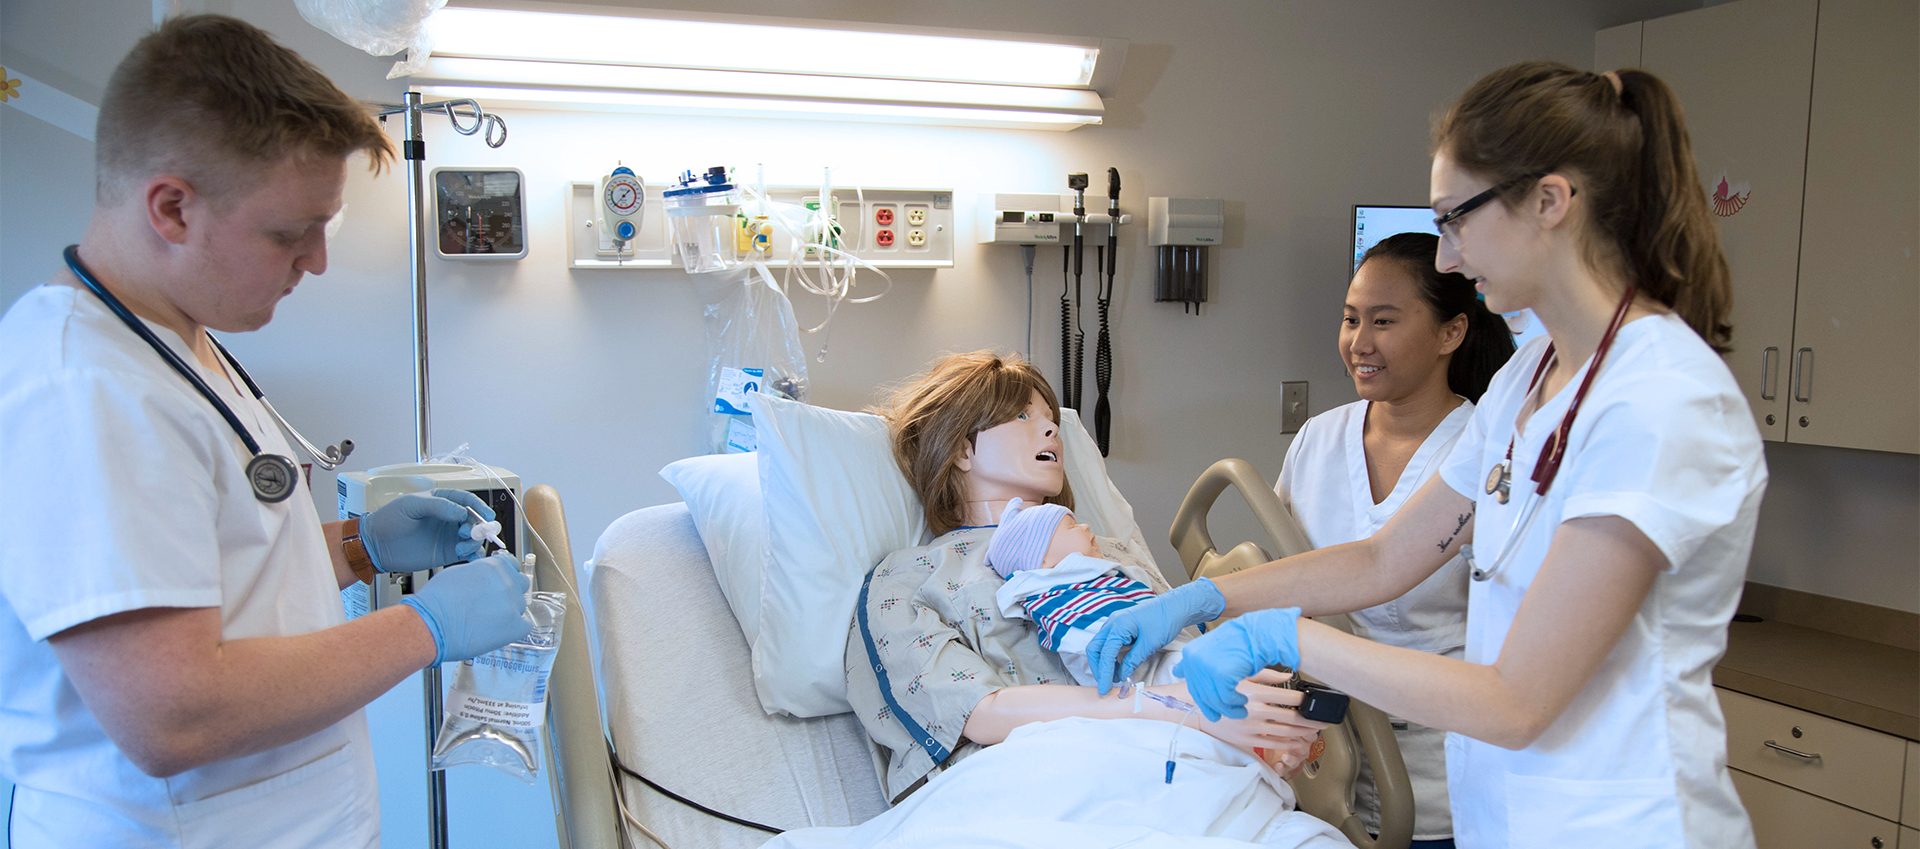 CHP students practice bedside manner with a mannequin and mannequin baby.